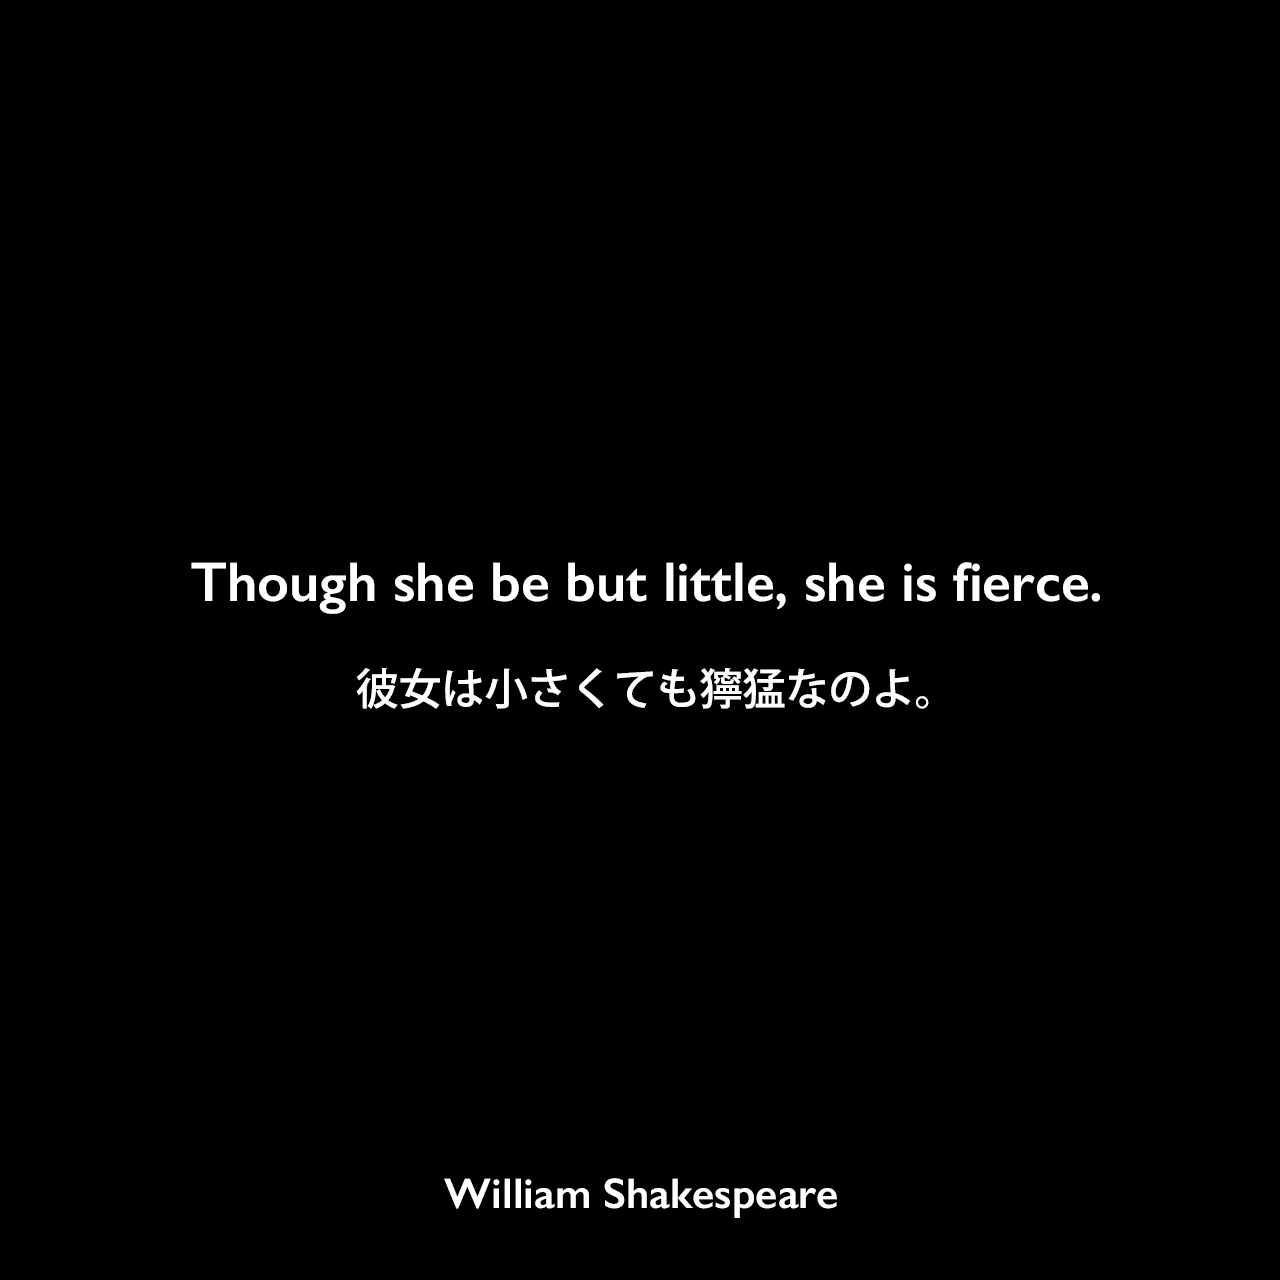 Though she be but little, she is fierce.彼女は小さくても獰猛なのよ。William Shakespeare